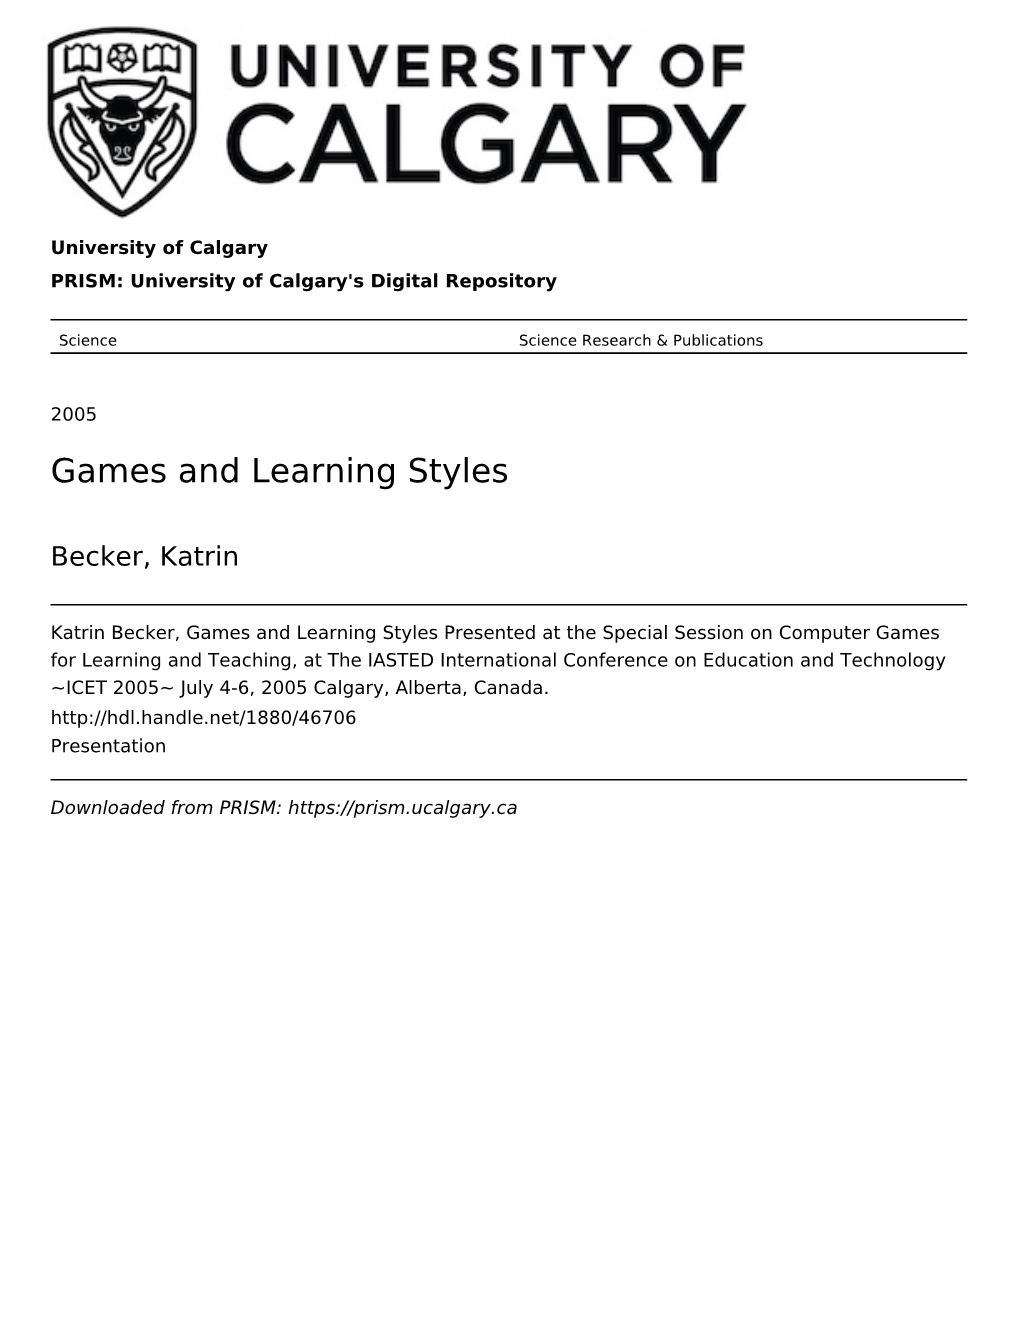 Games and Learning Styles